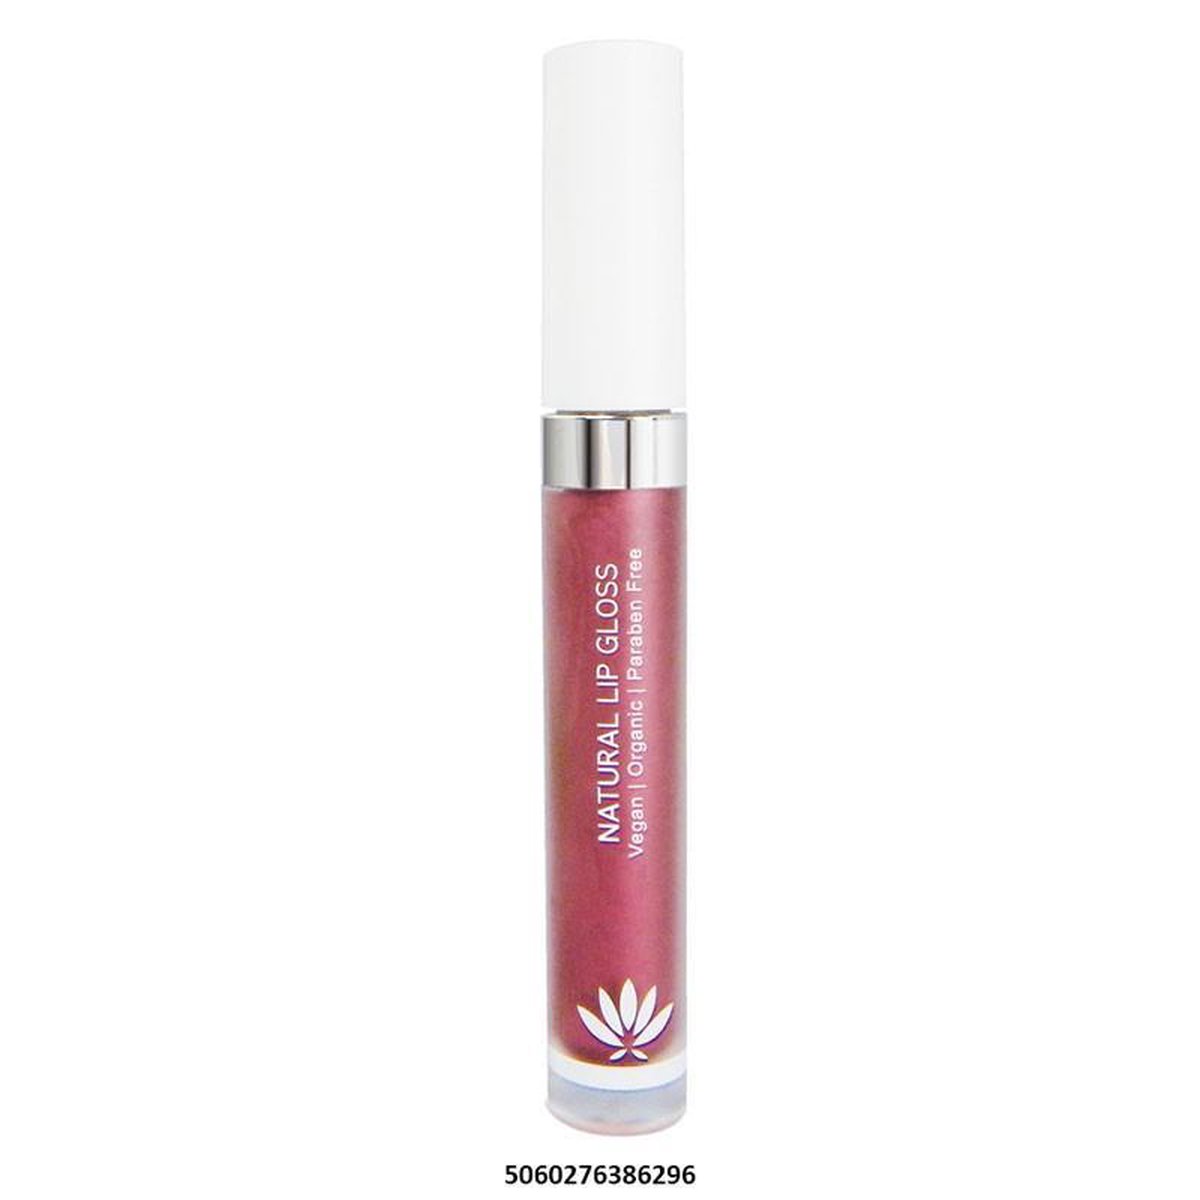 PHB Ethical beauty - 100% Pure Organic Lip Gloss Mulberry